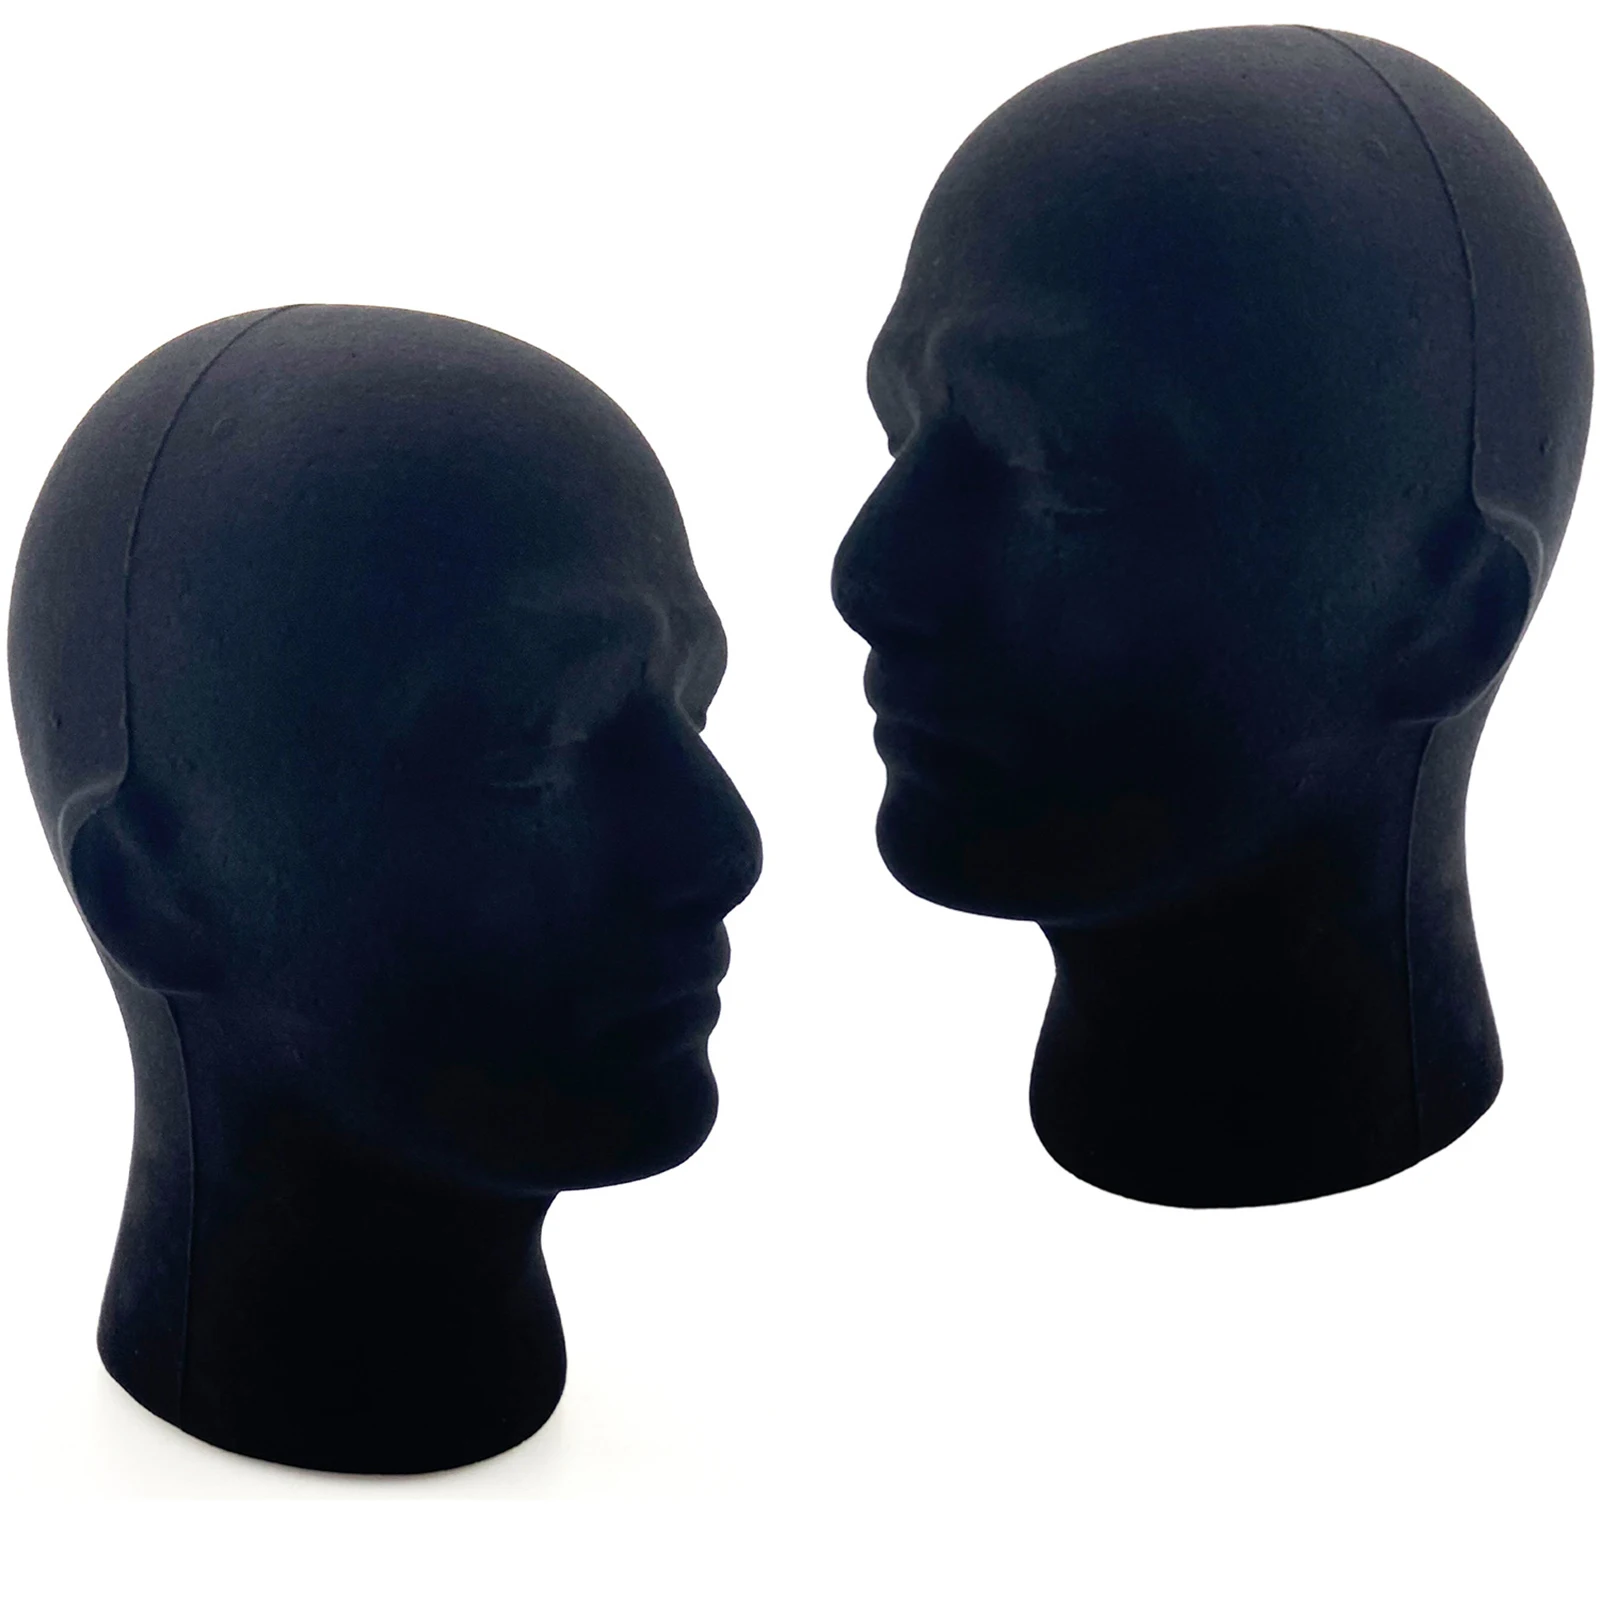 

Manikin Head Multipurpose Wig Display Model Head Hat Wig Display Stand for Shop Props Home Salon and Travel Hairdresser Training